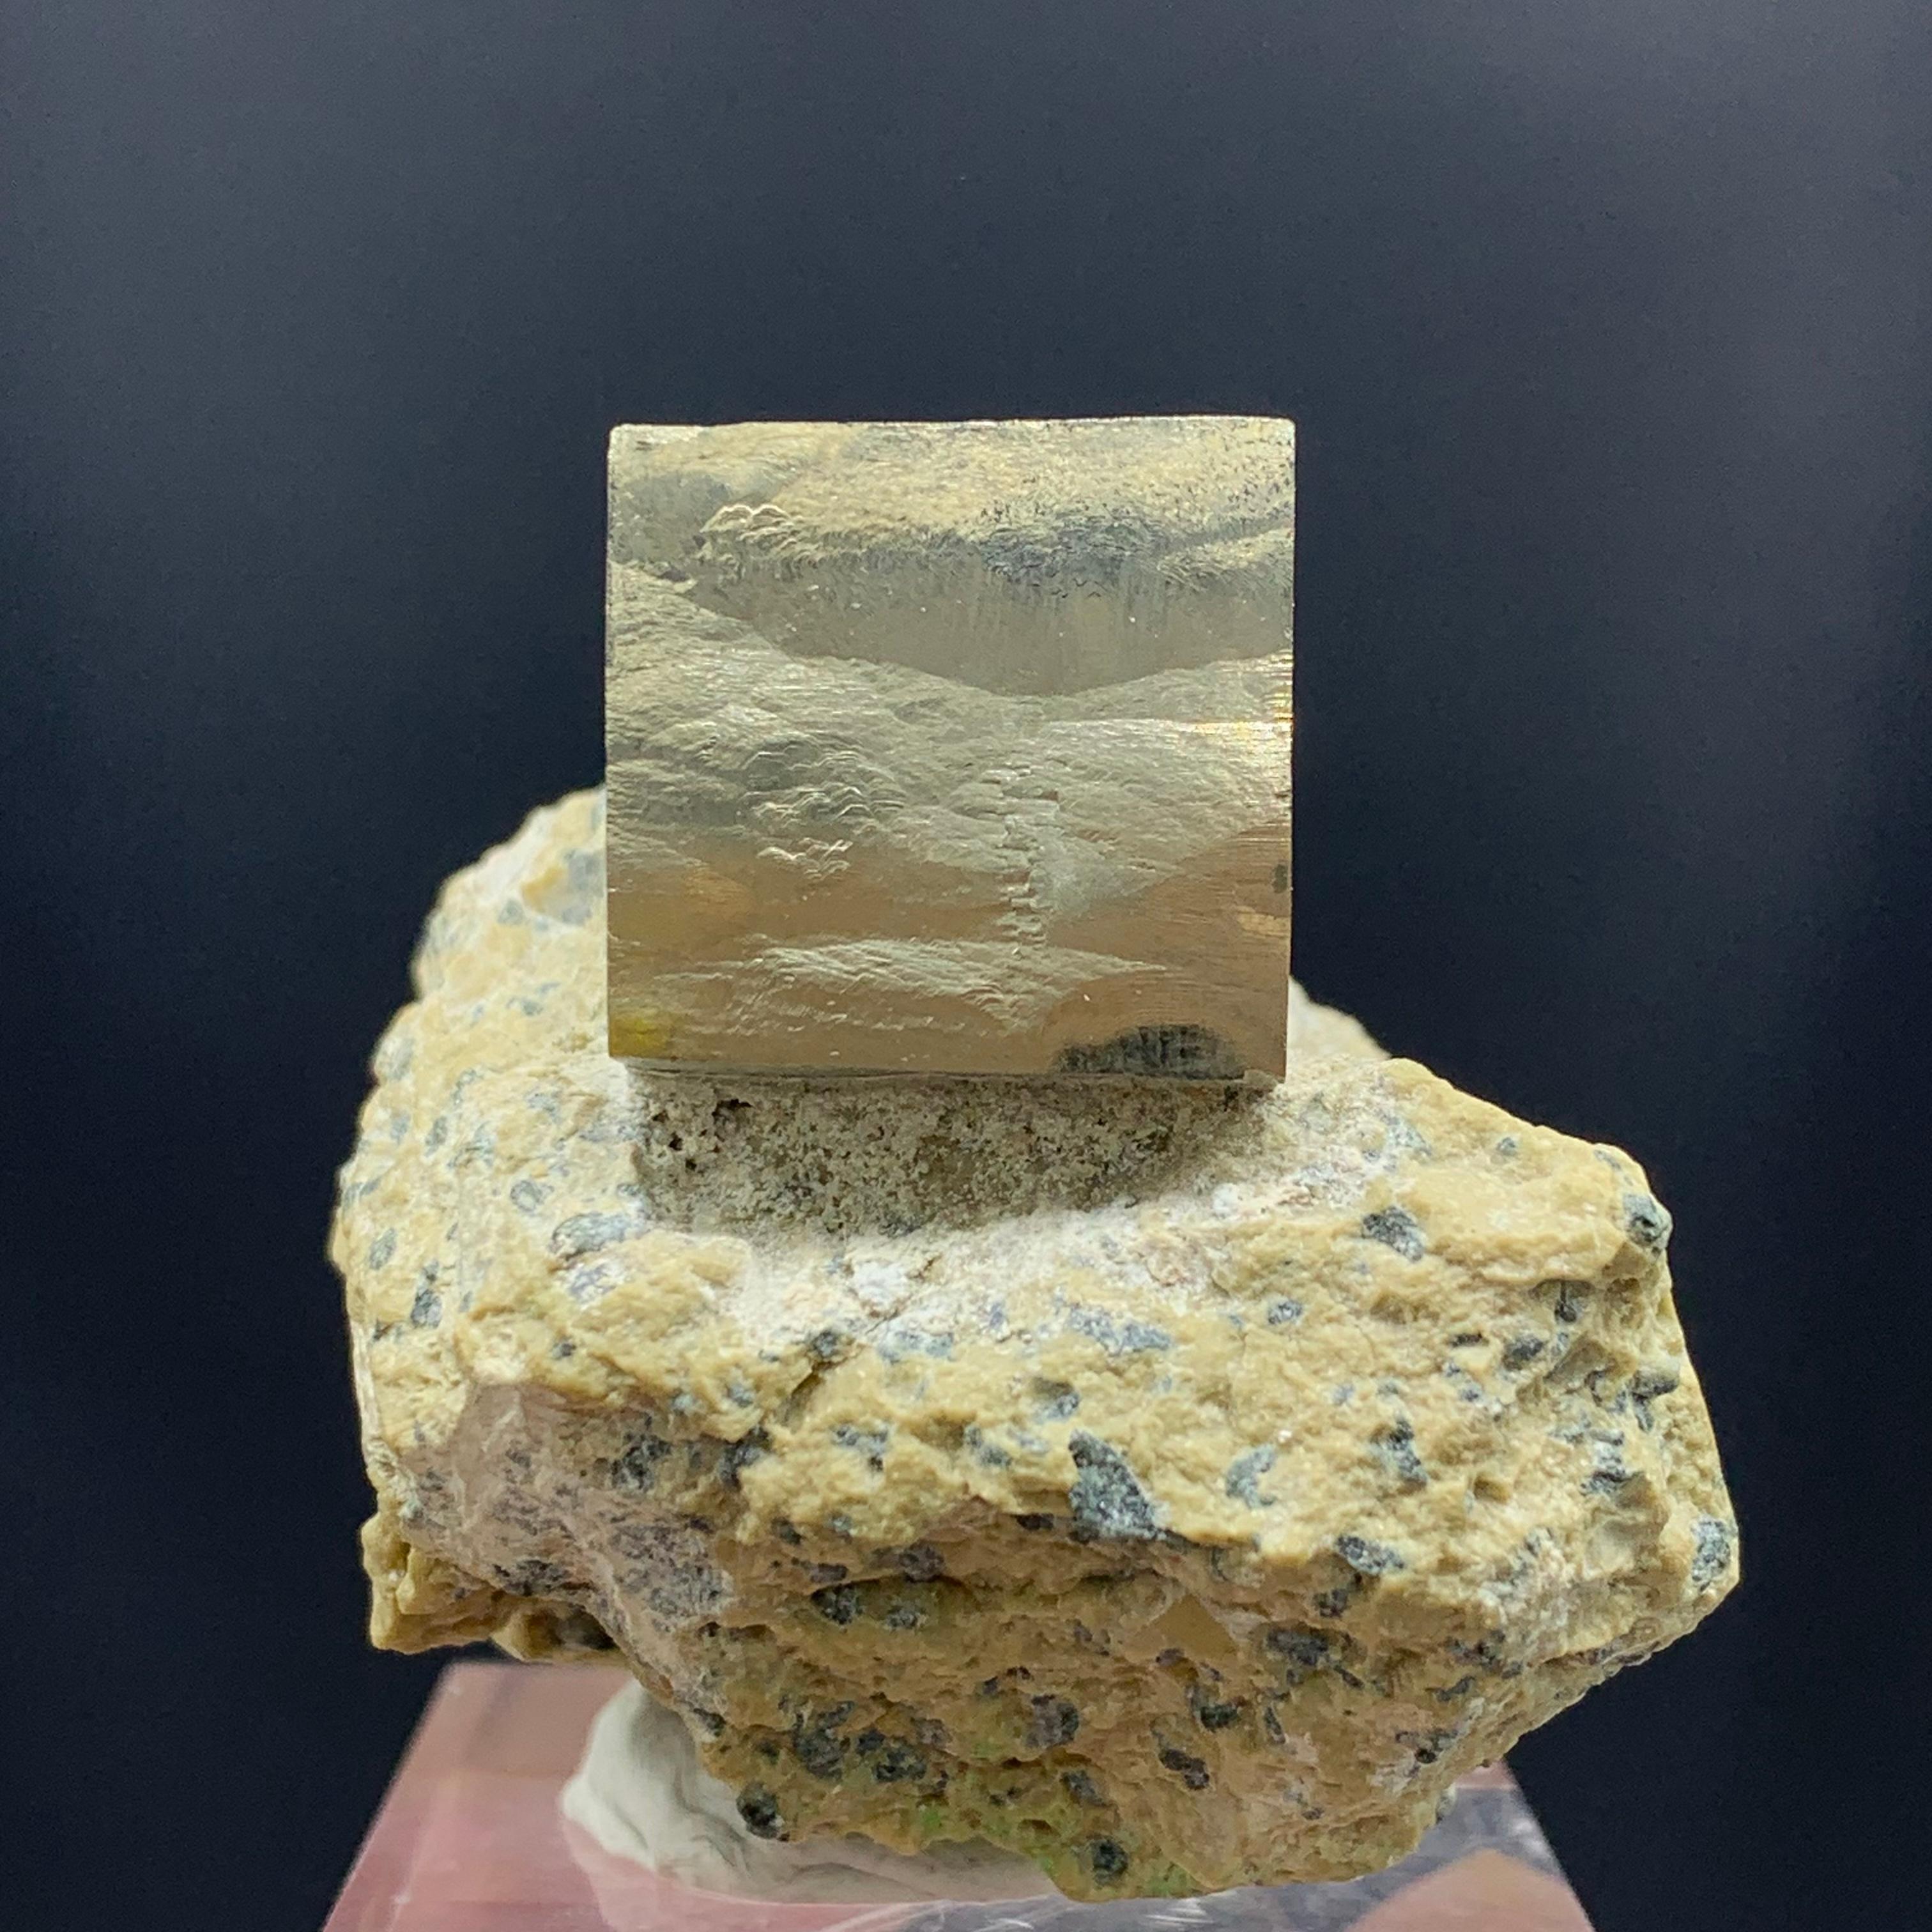 Lustrous Pyrite Cube on Marl Matrix Rock Specimen from Spain
Weight: 121.53 Gram
DIM: 4.3 x 4.1 x 4.8 Cm
Origin: Spain
The mineral pyrite, or iron pyrite, also known as fool's gold, is an iron sulphide with the chemical formula FeS2. Pyrite is